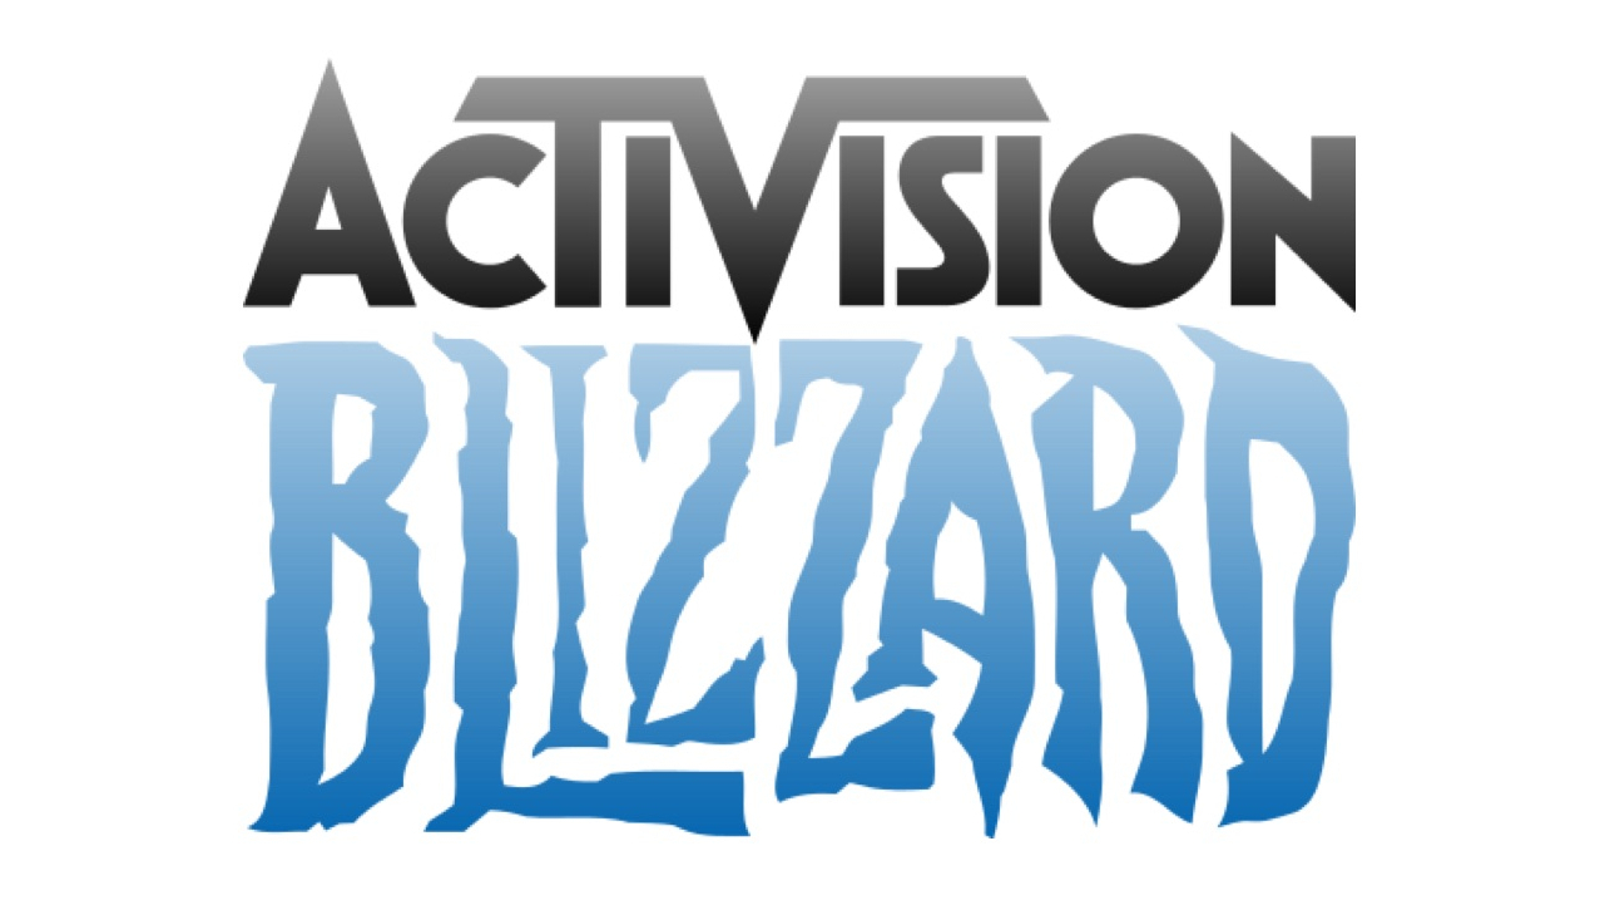 Bad News for PlayStation Owners as Report Suggests Activision